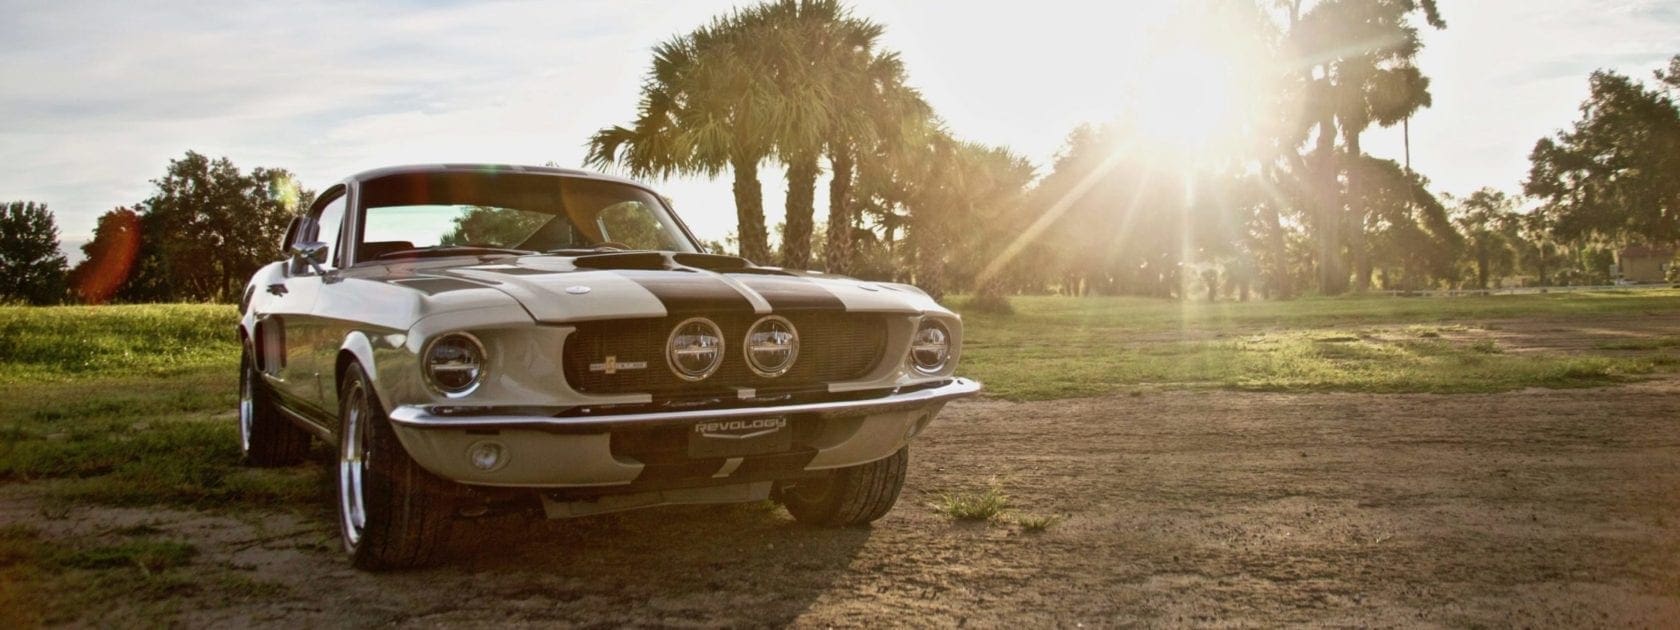 Startup company manufactures 'new' 1964 Ford Mustang replica that has all the latest technology - for the very 21st century price of $120,000